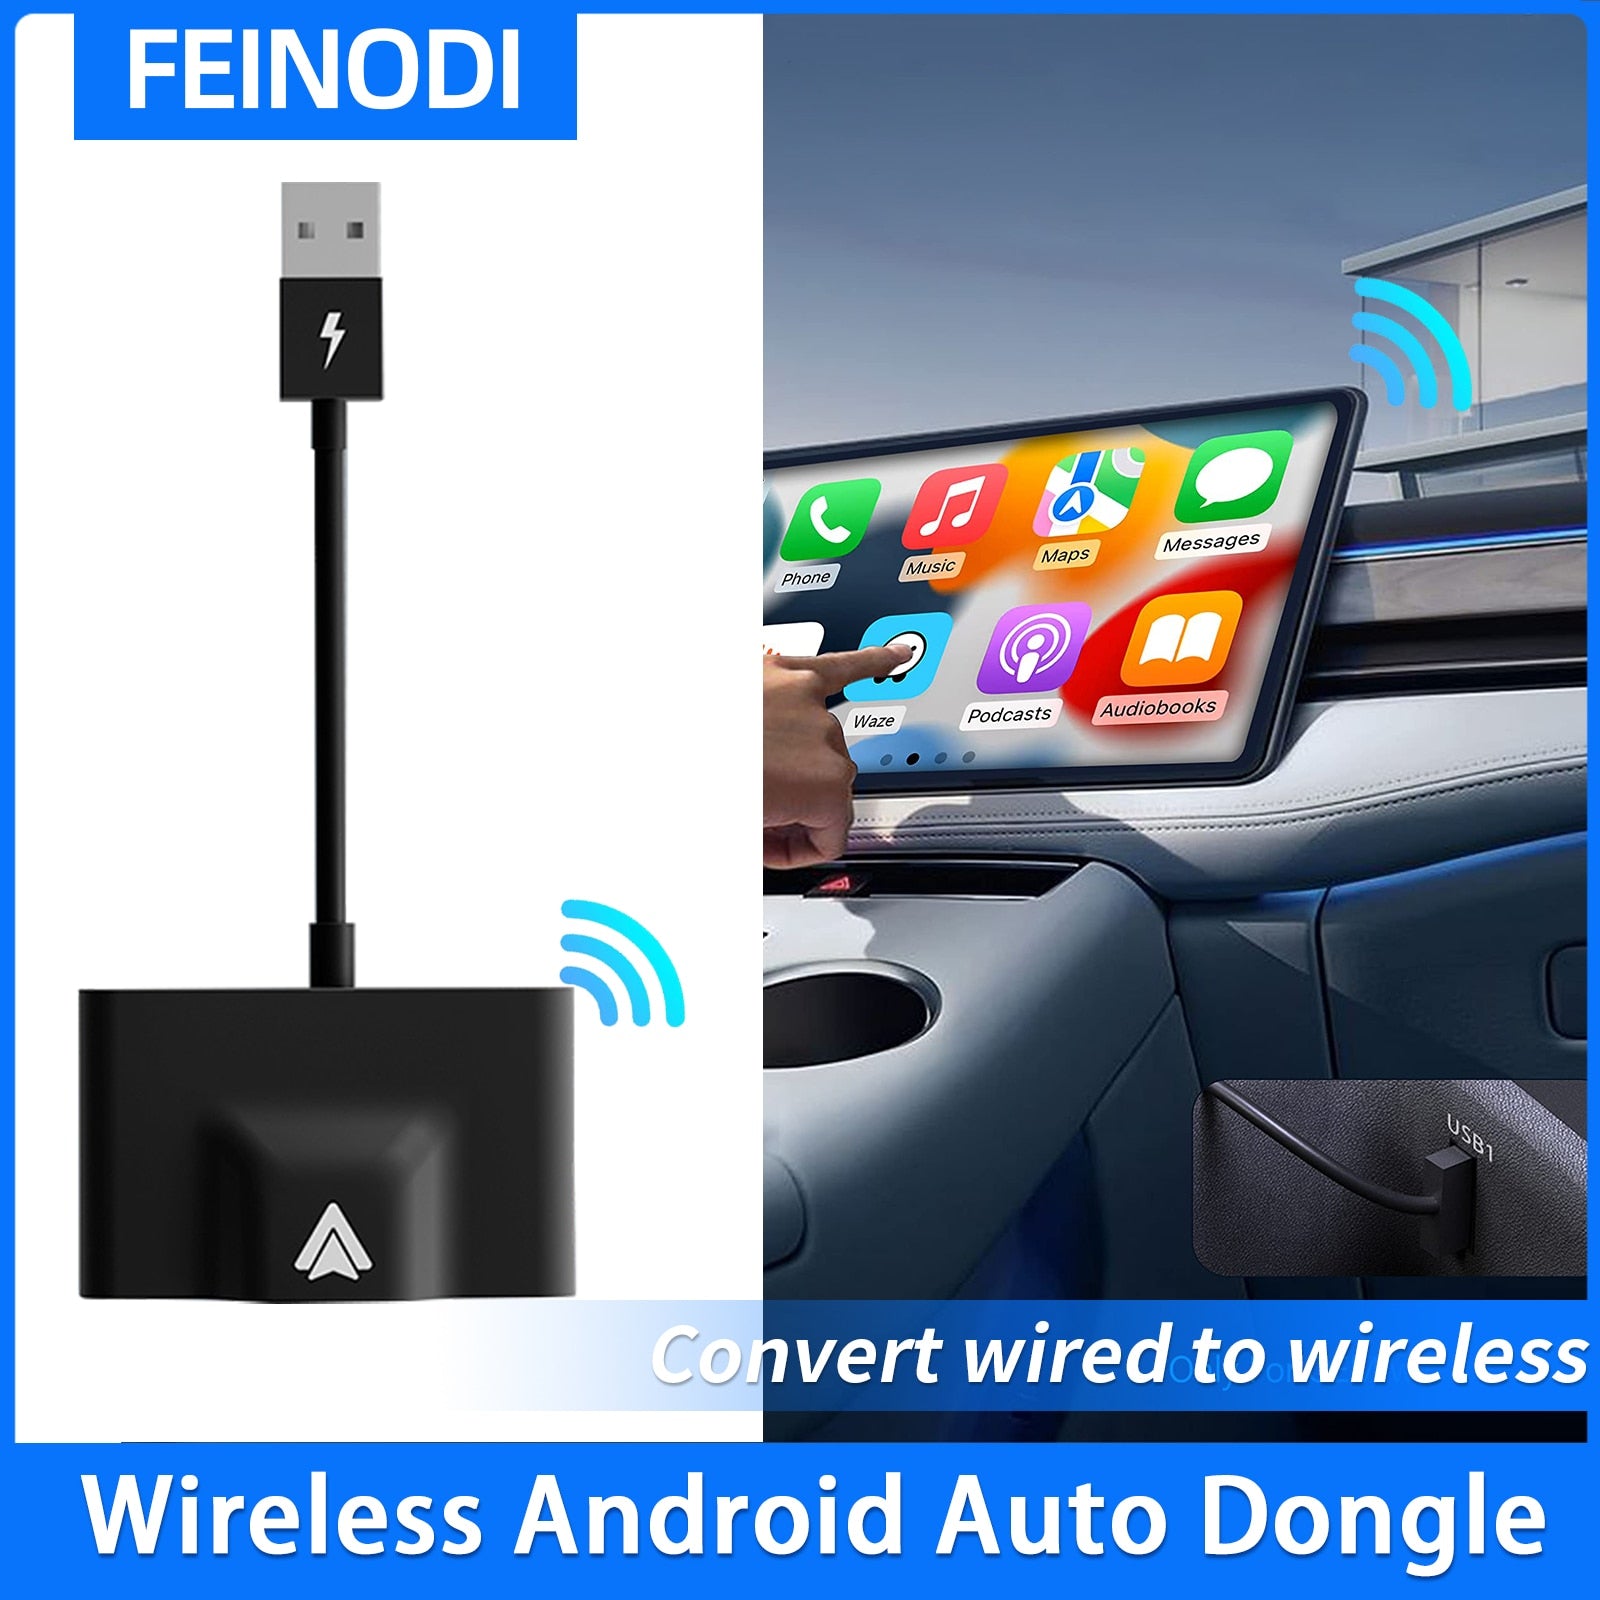 Wireless Android Auto Adapter for OEM Wired AA Cars Android Auto Dongle for Android Phone Convert Wired to Wireless 5Ghz WiFi